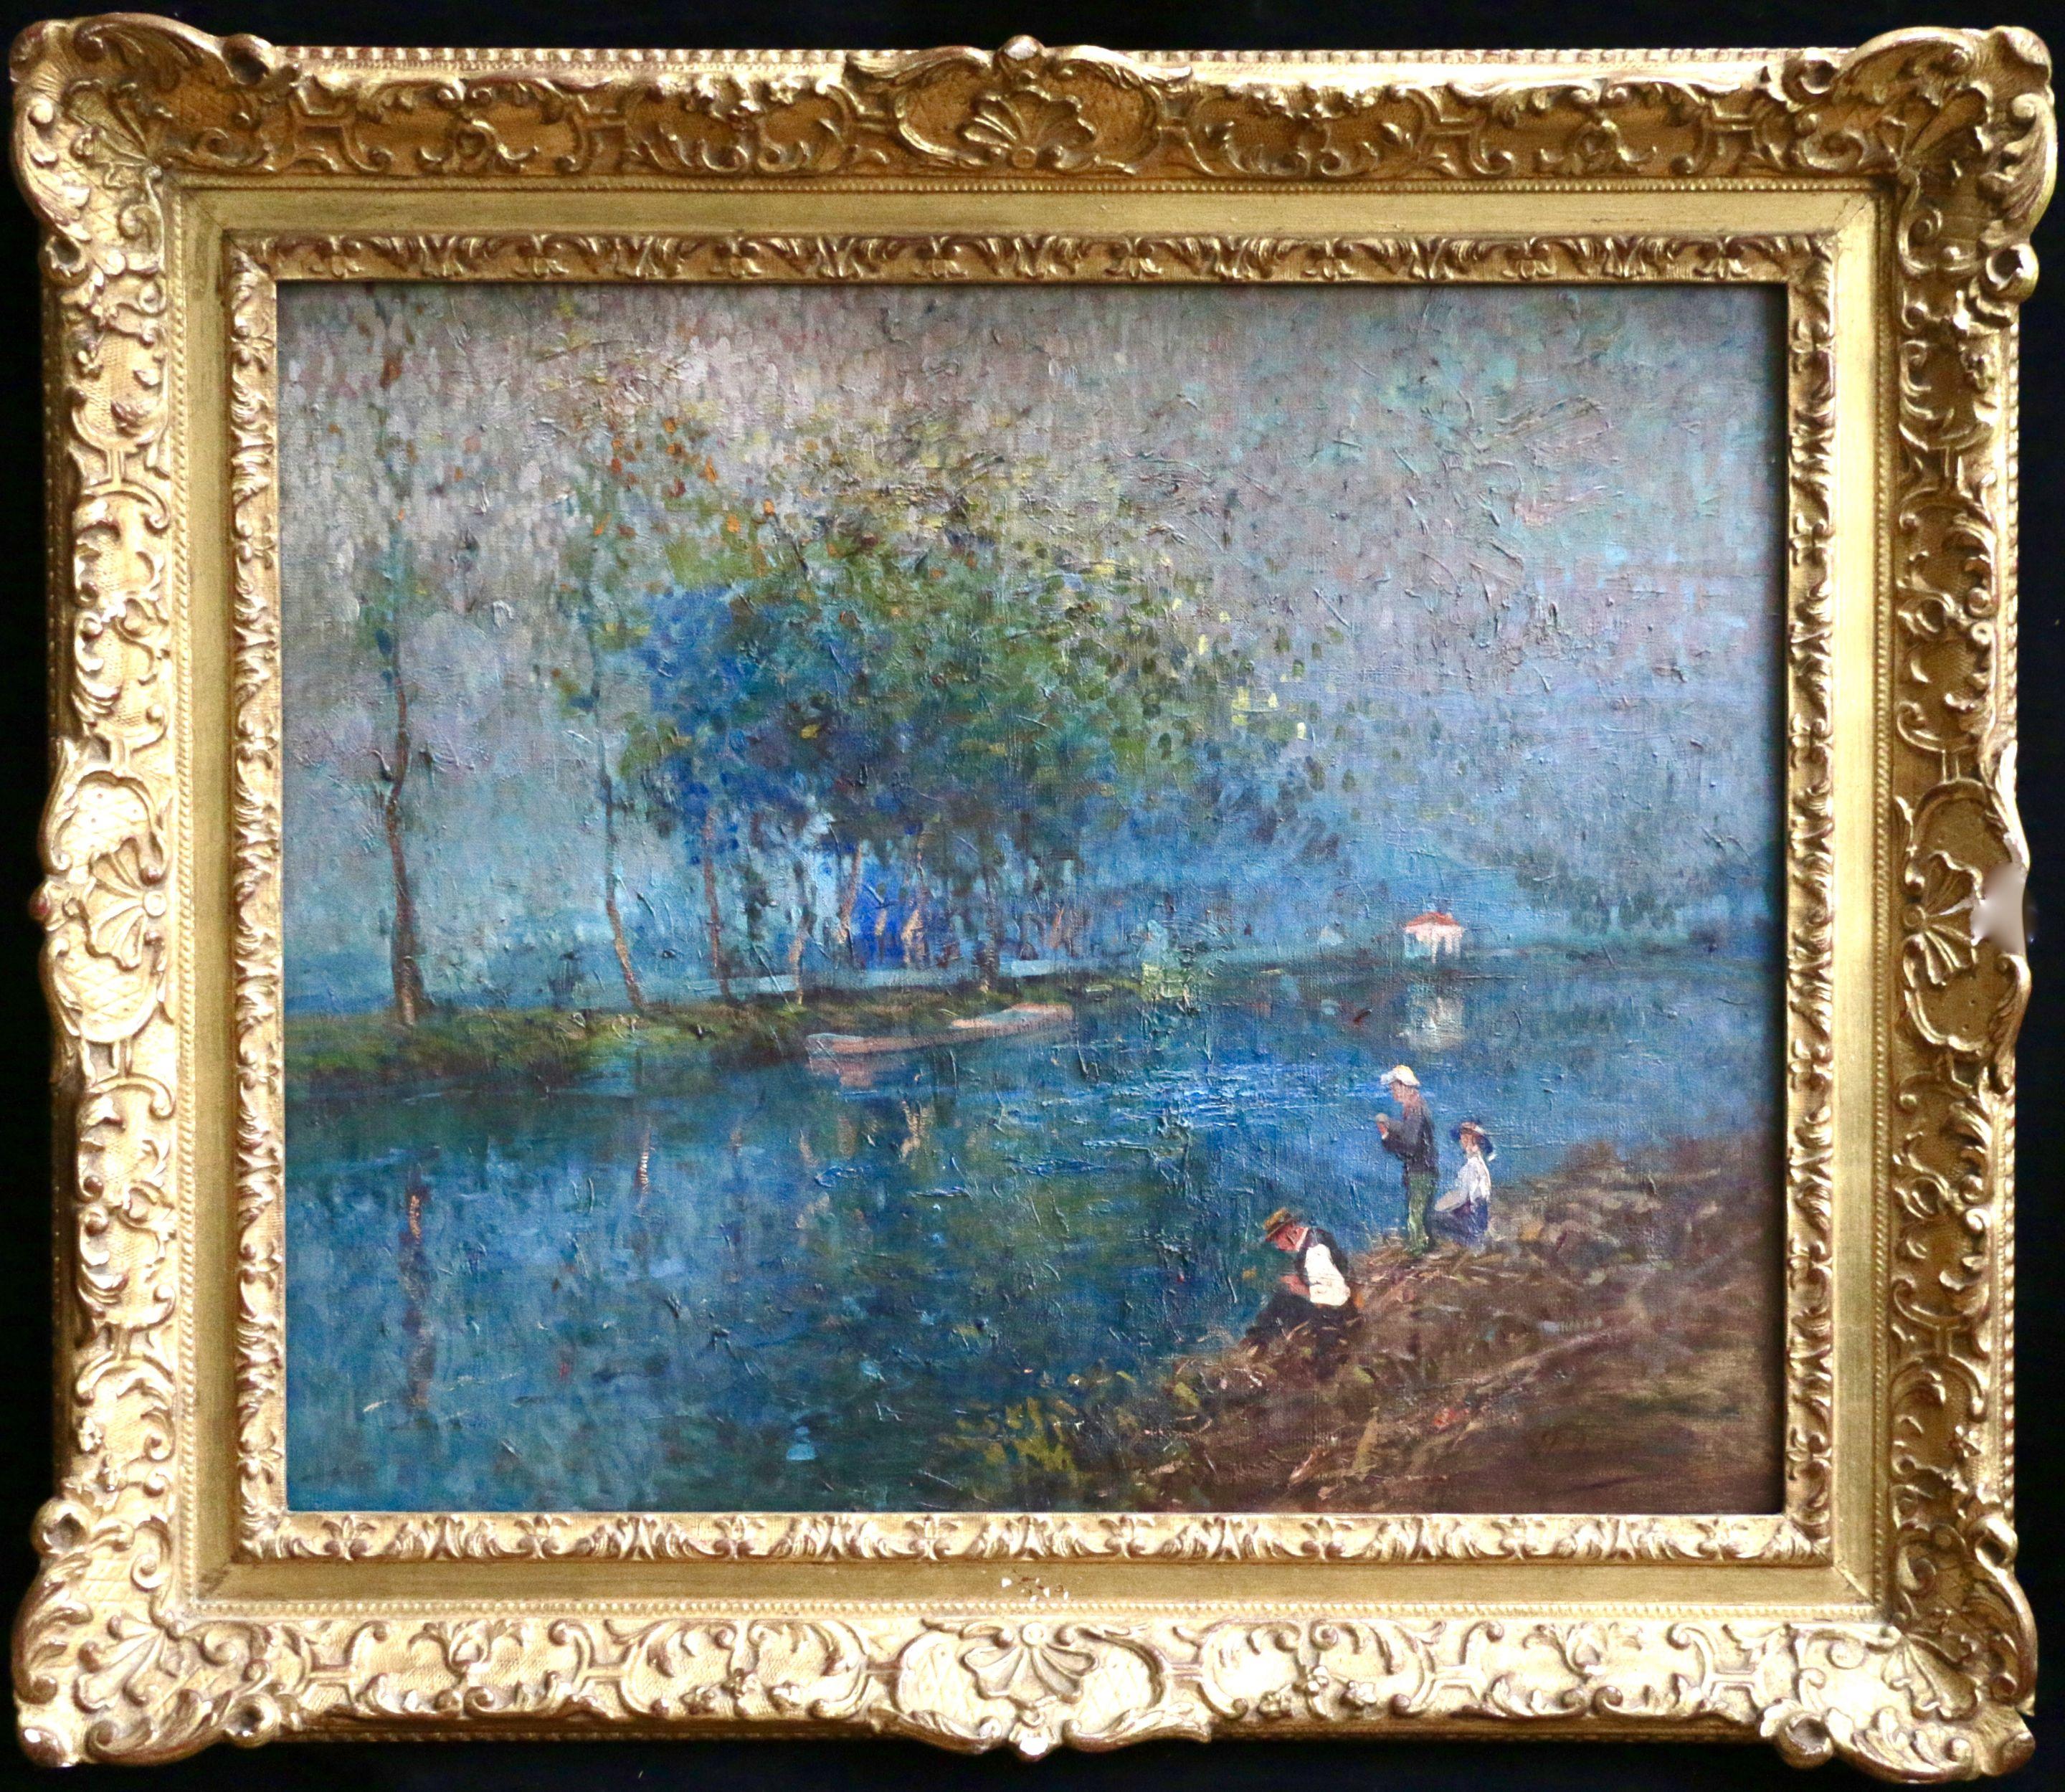 Elie Anatole Pavil Figurative Painting - On the River - 19th Century Oil, Figures & Trees on Bank of River by Elie Pavil